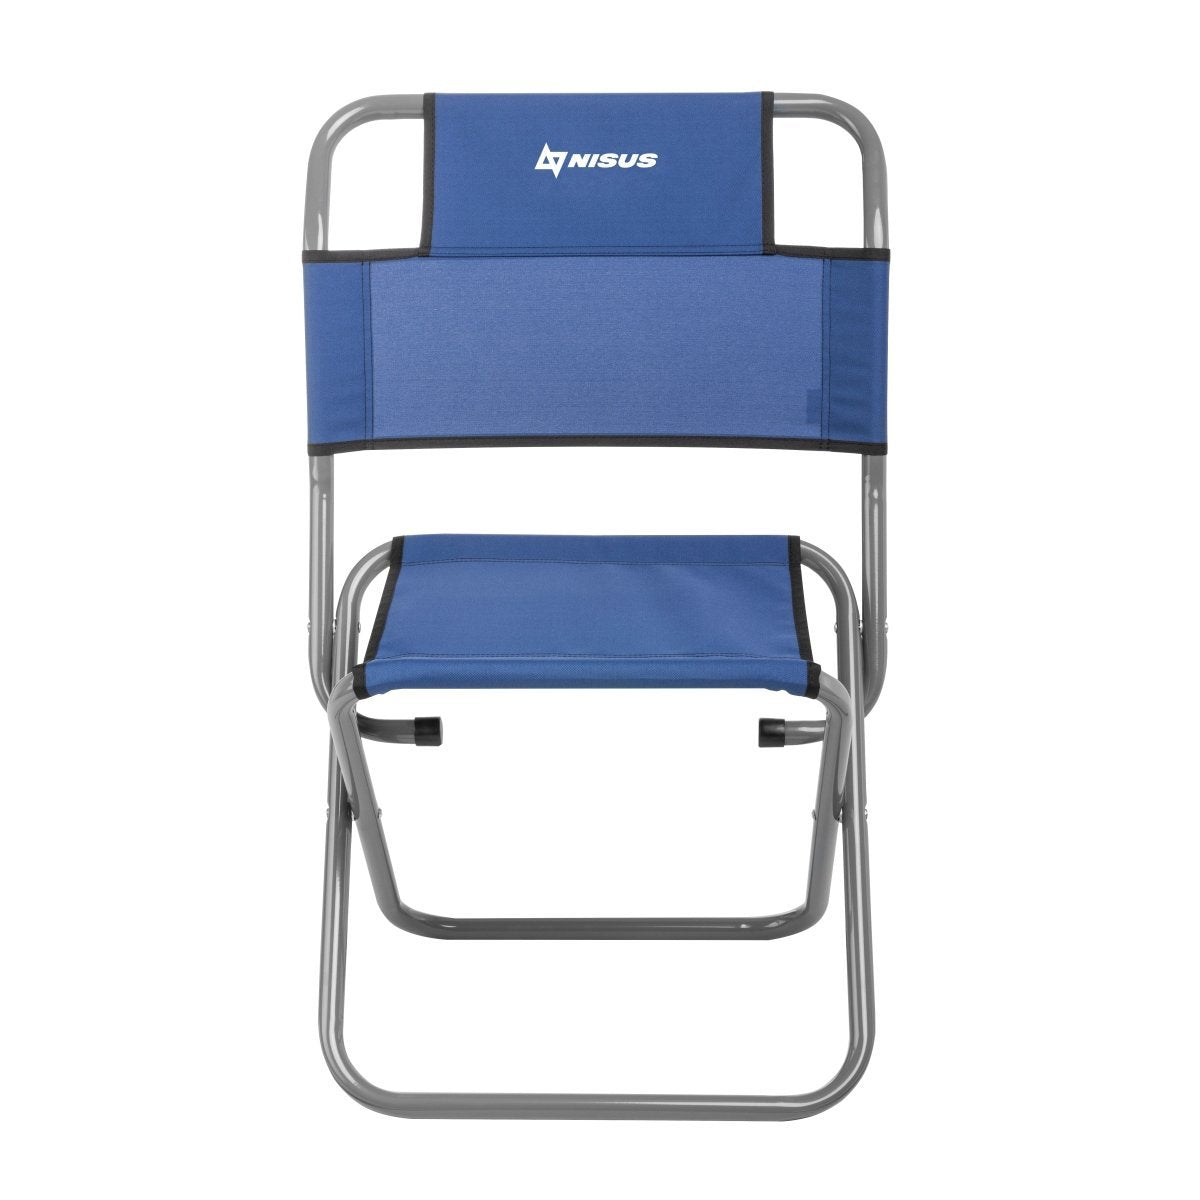 Nisus blue folding camping chair with a back